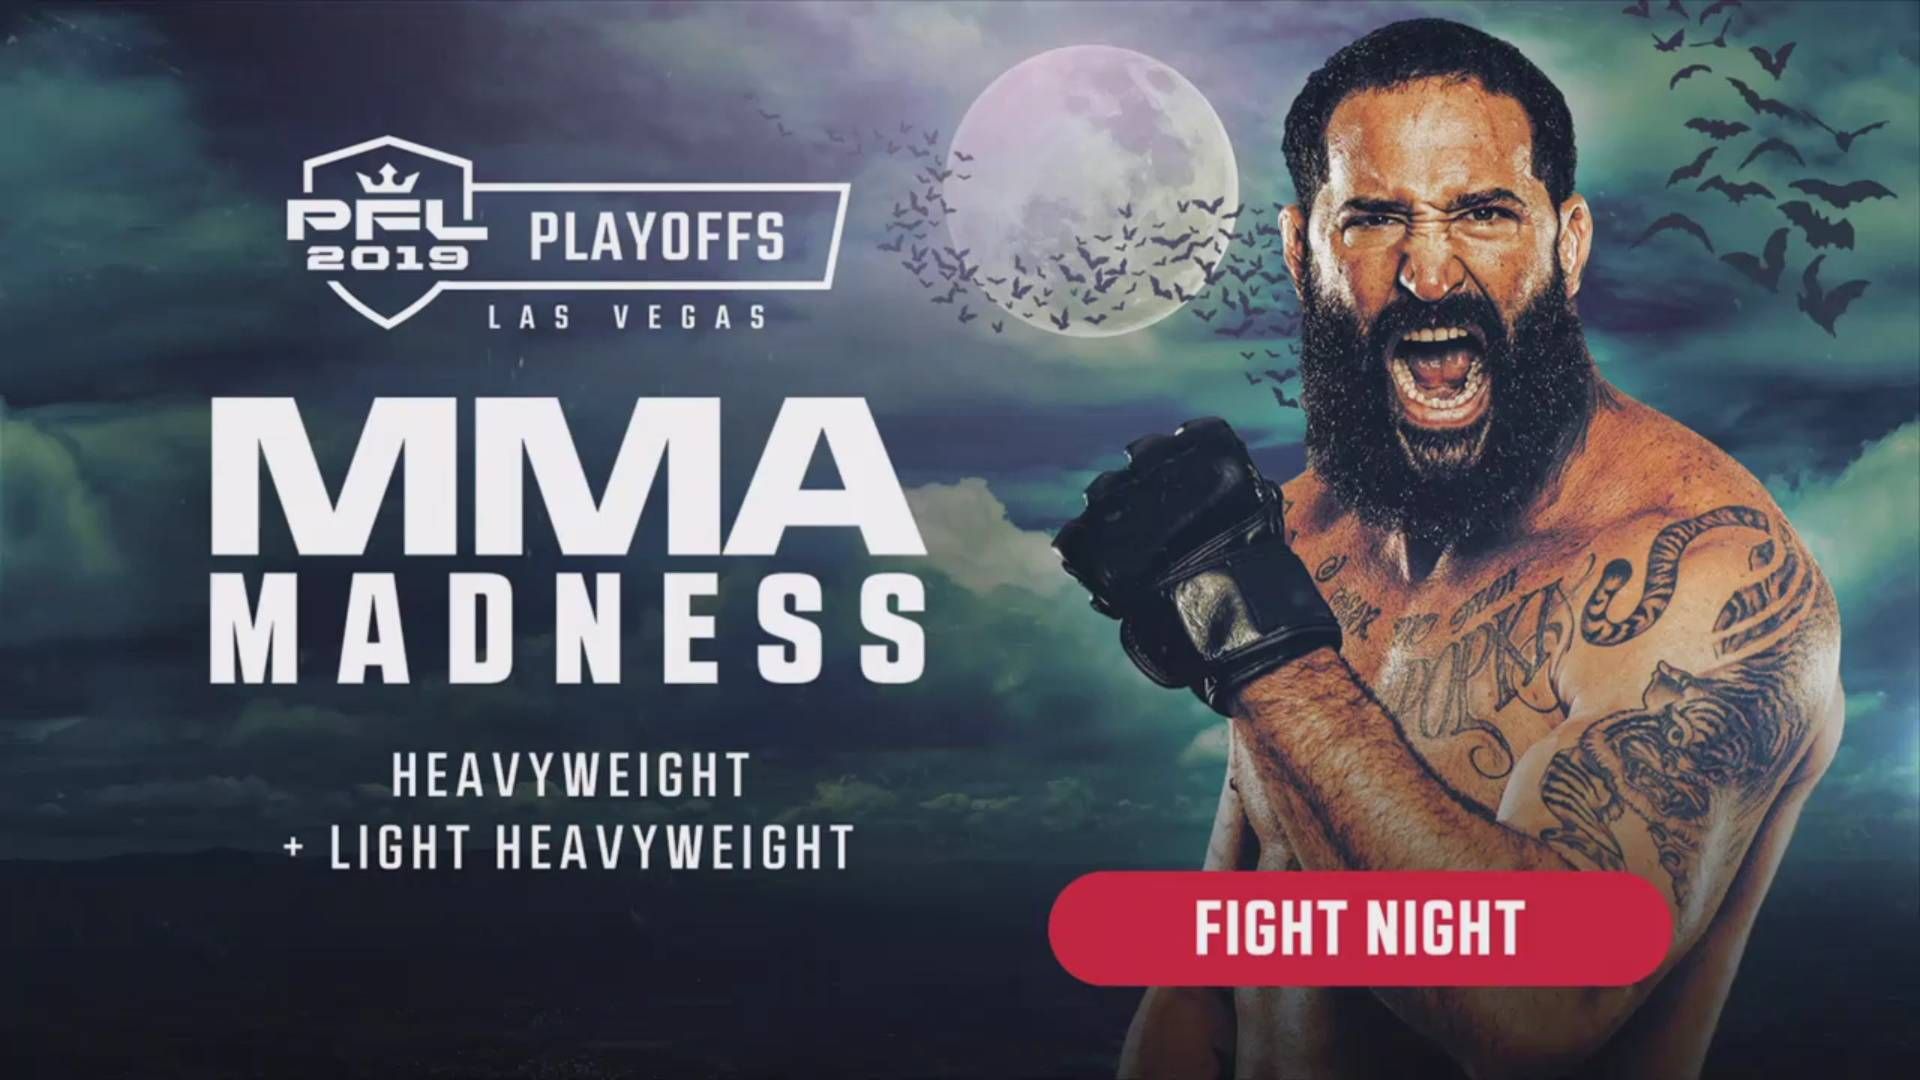 Цитата из «PFL9 Playoffs | 2019 Live at the Mandalay Bay Events Center in Las Vegas»